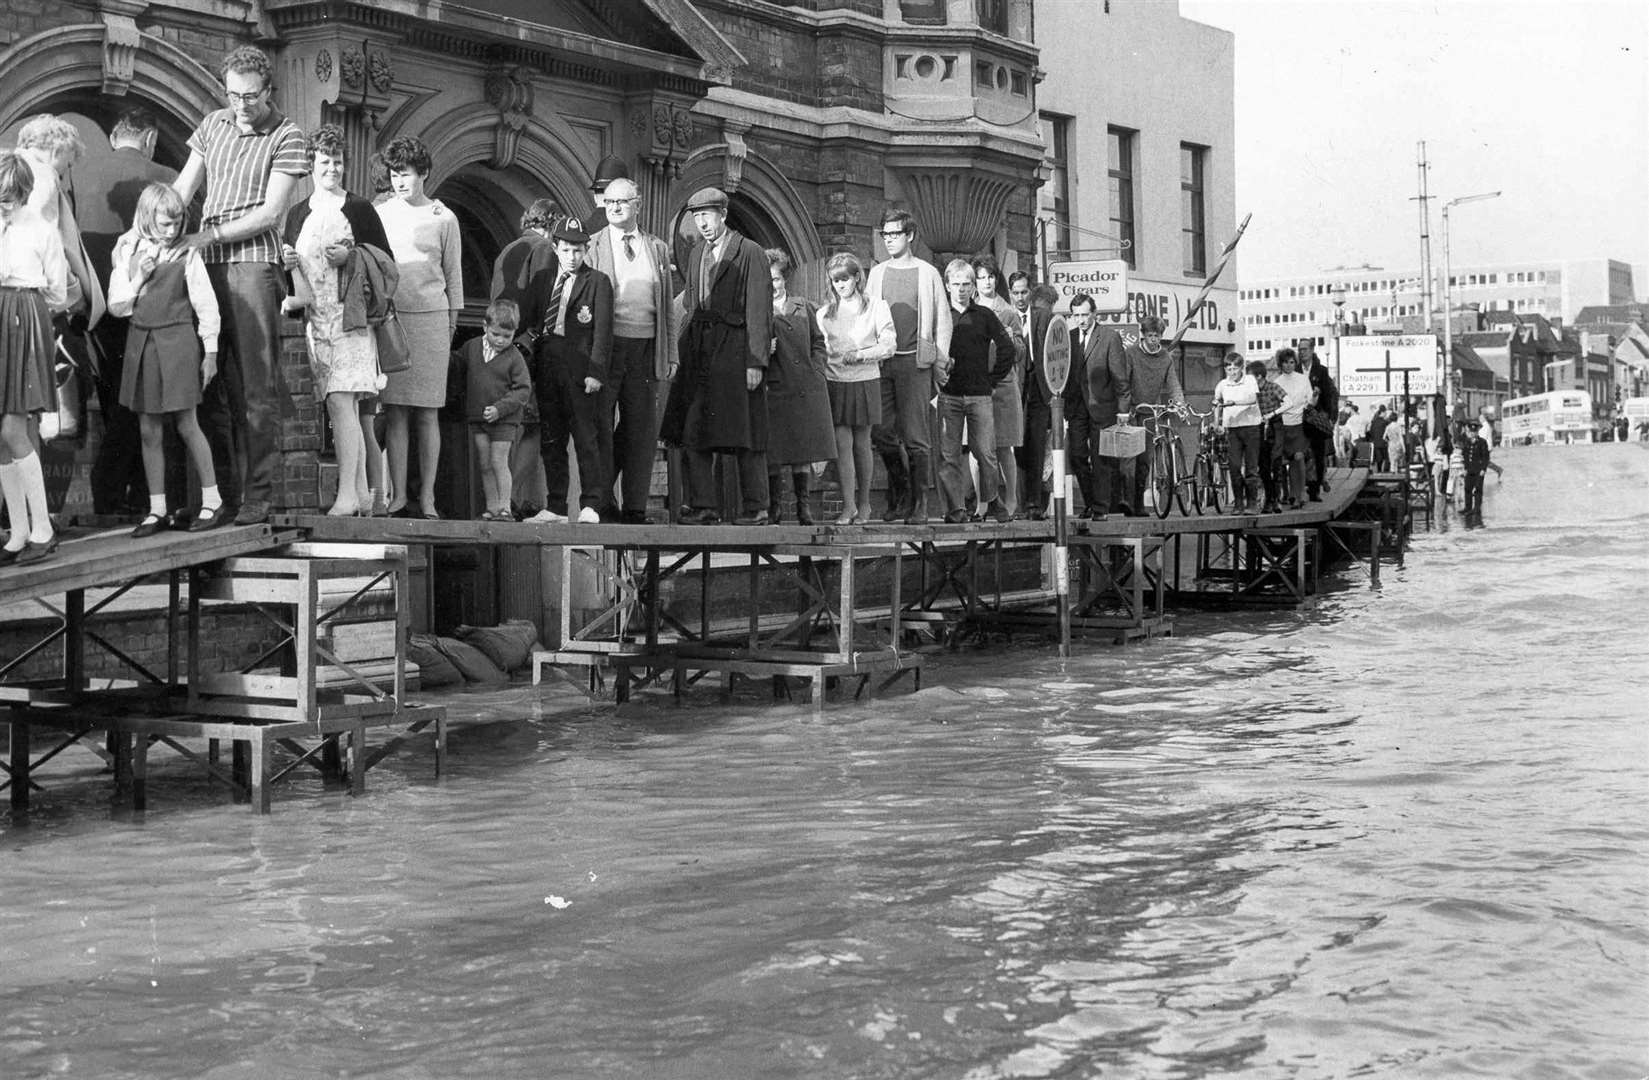 The clothes suggest it was a nice day - apart from the extent of these floods in Maidstone in 1968